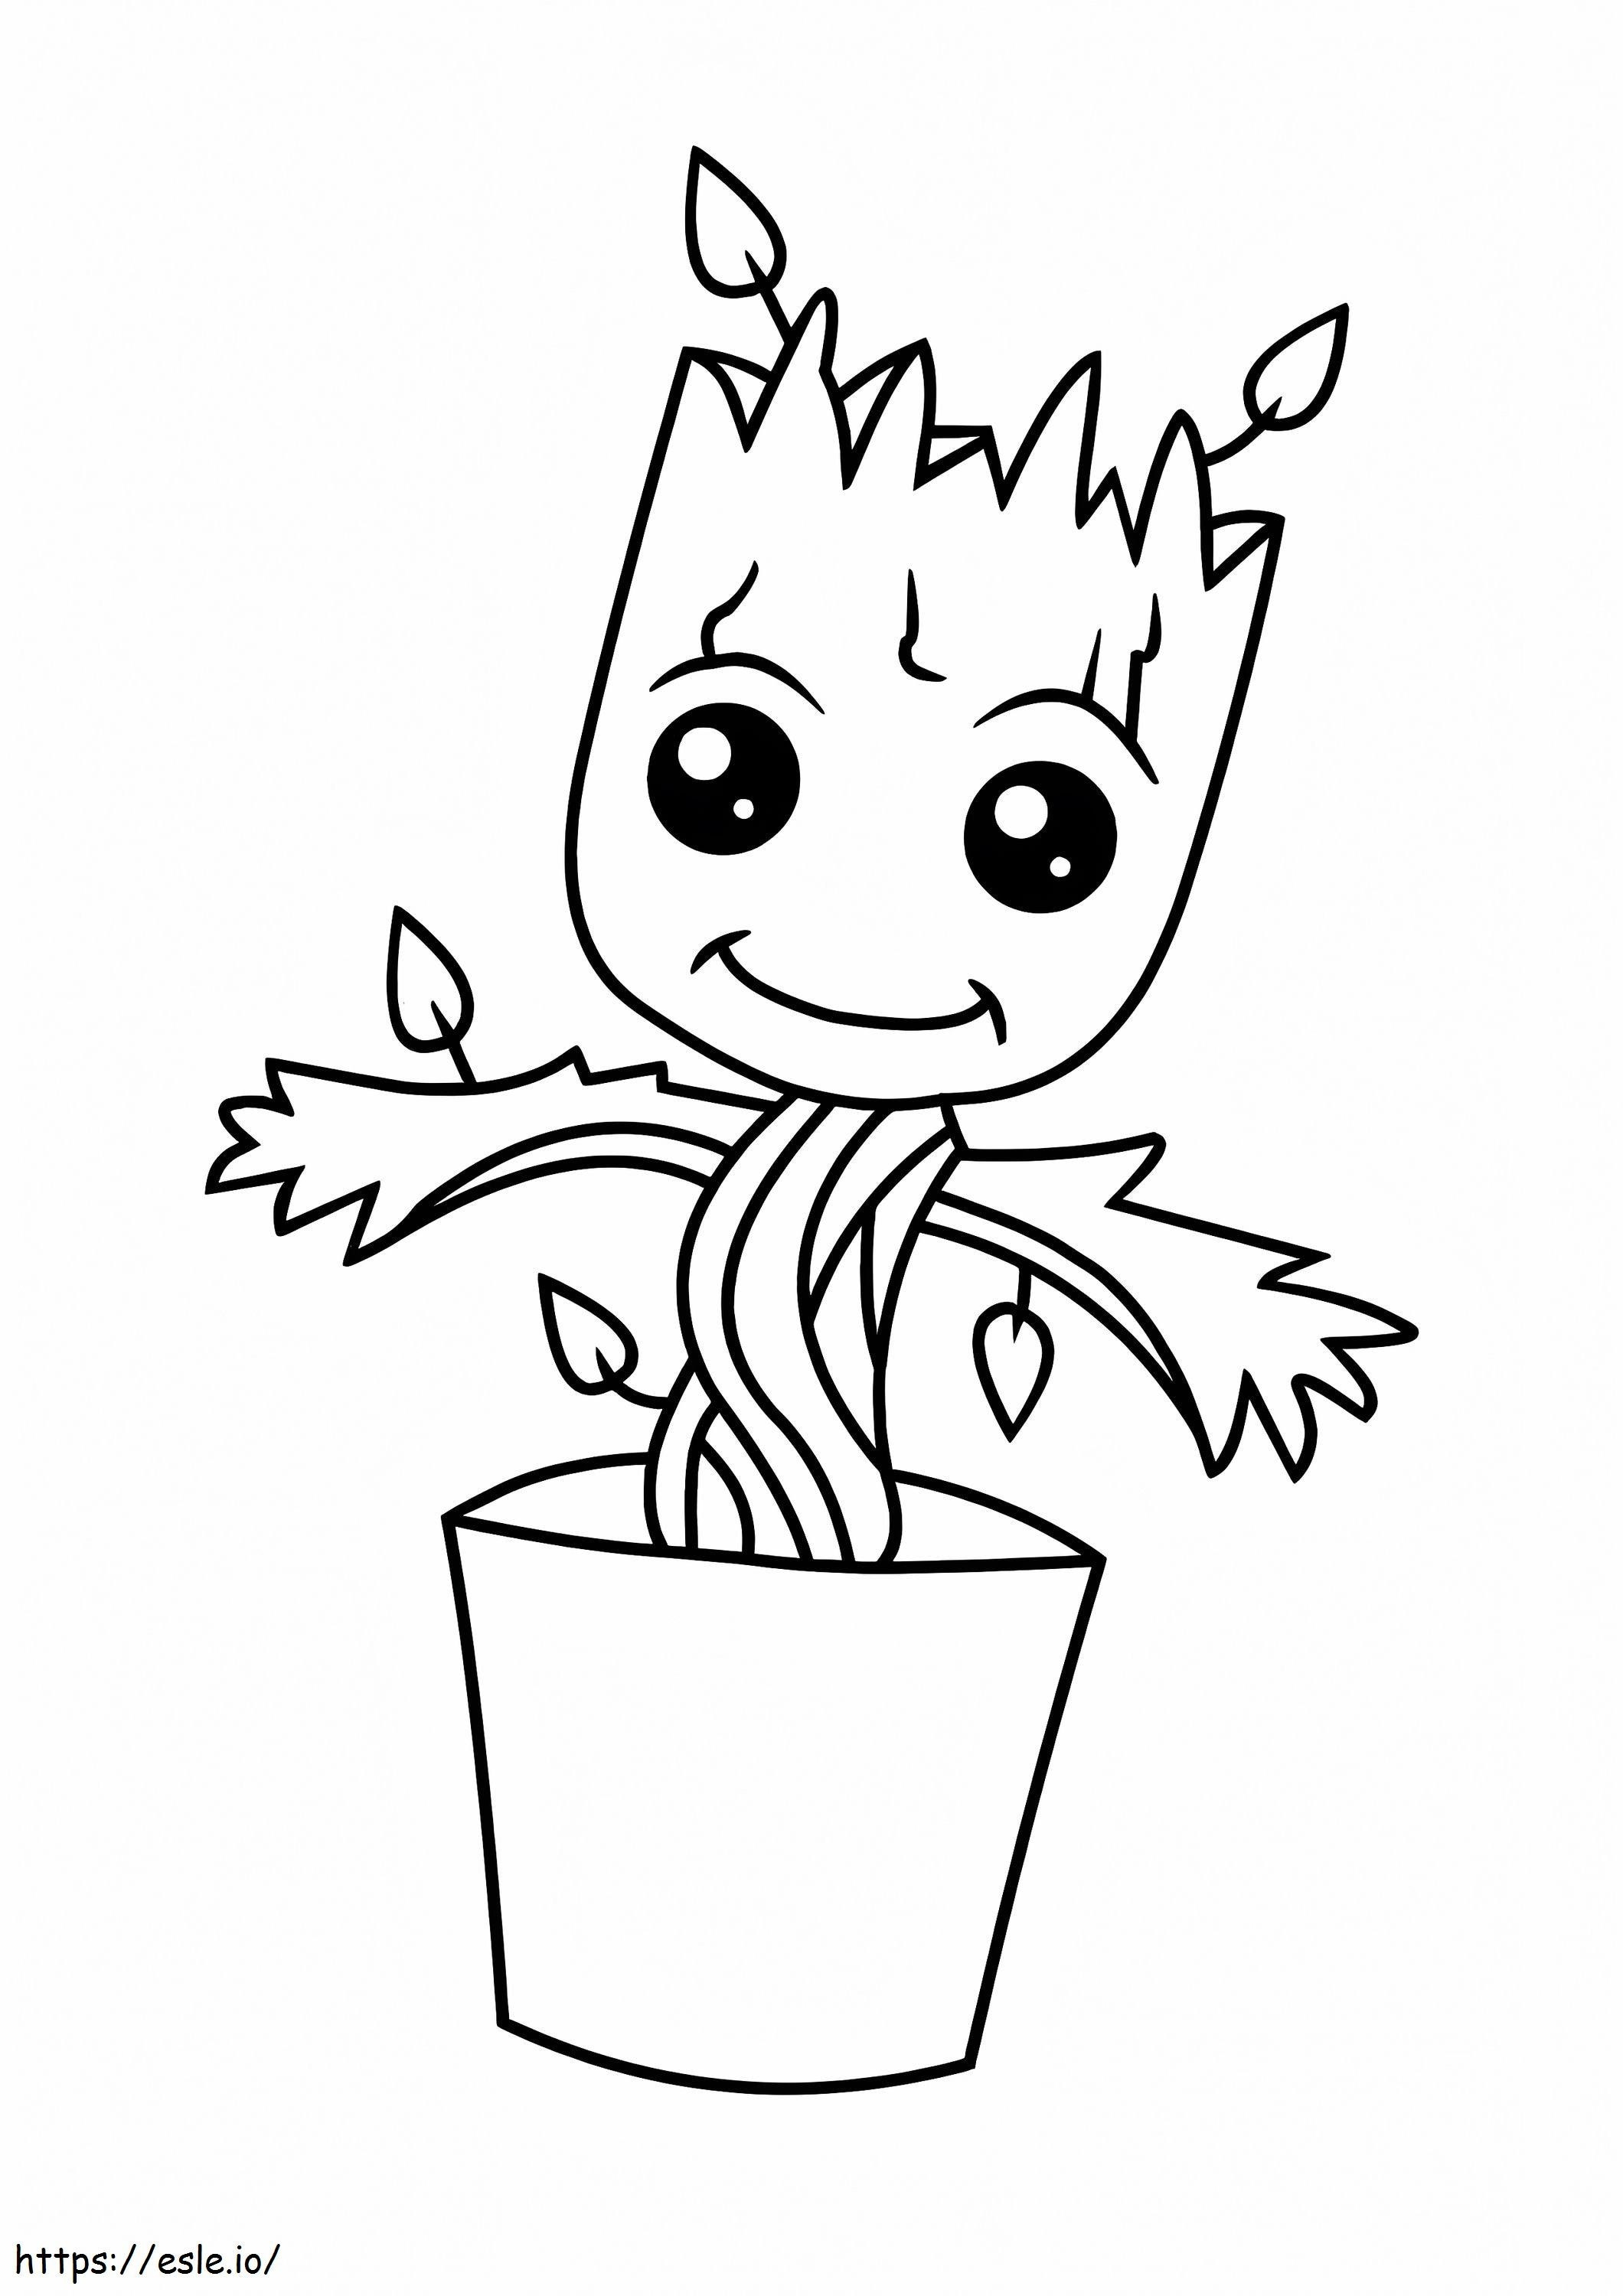 Little Groot Smiling In Vase coloring page